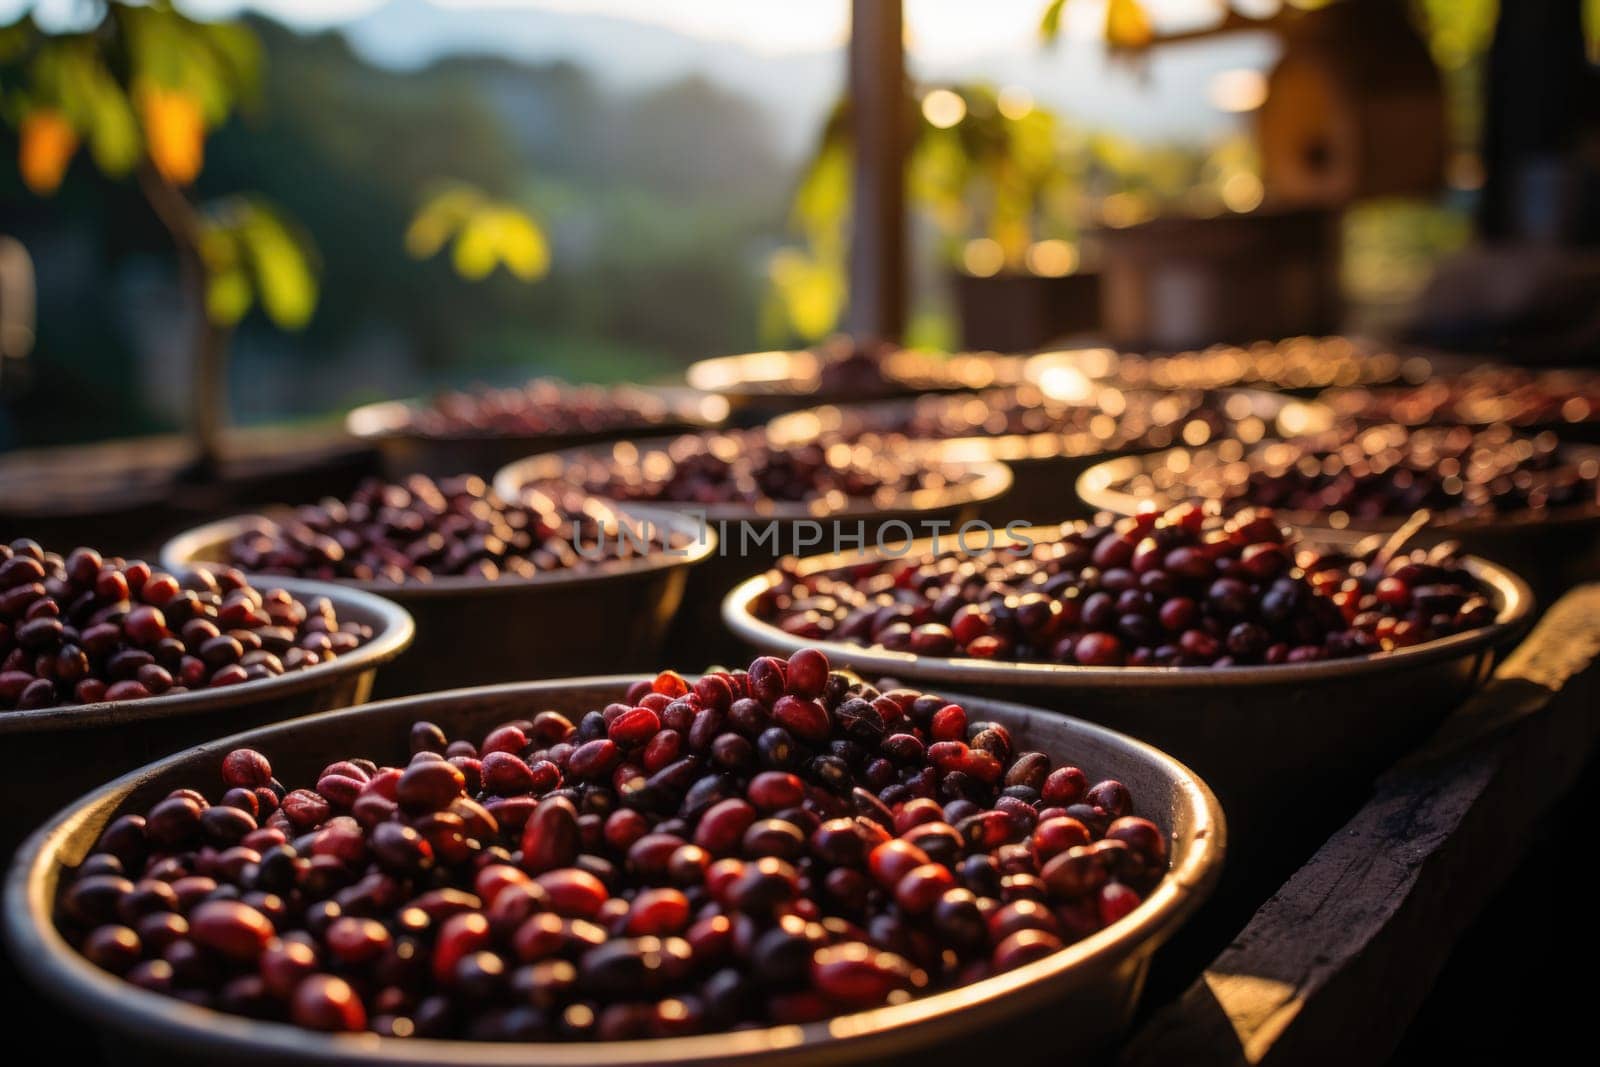 The collected fresh coffee lies in large plates under the rays of the sun.